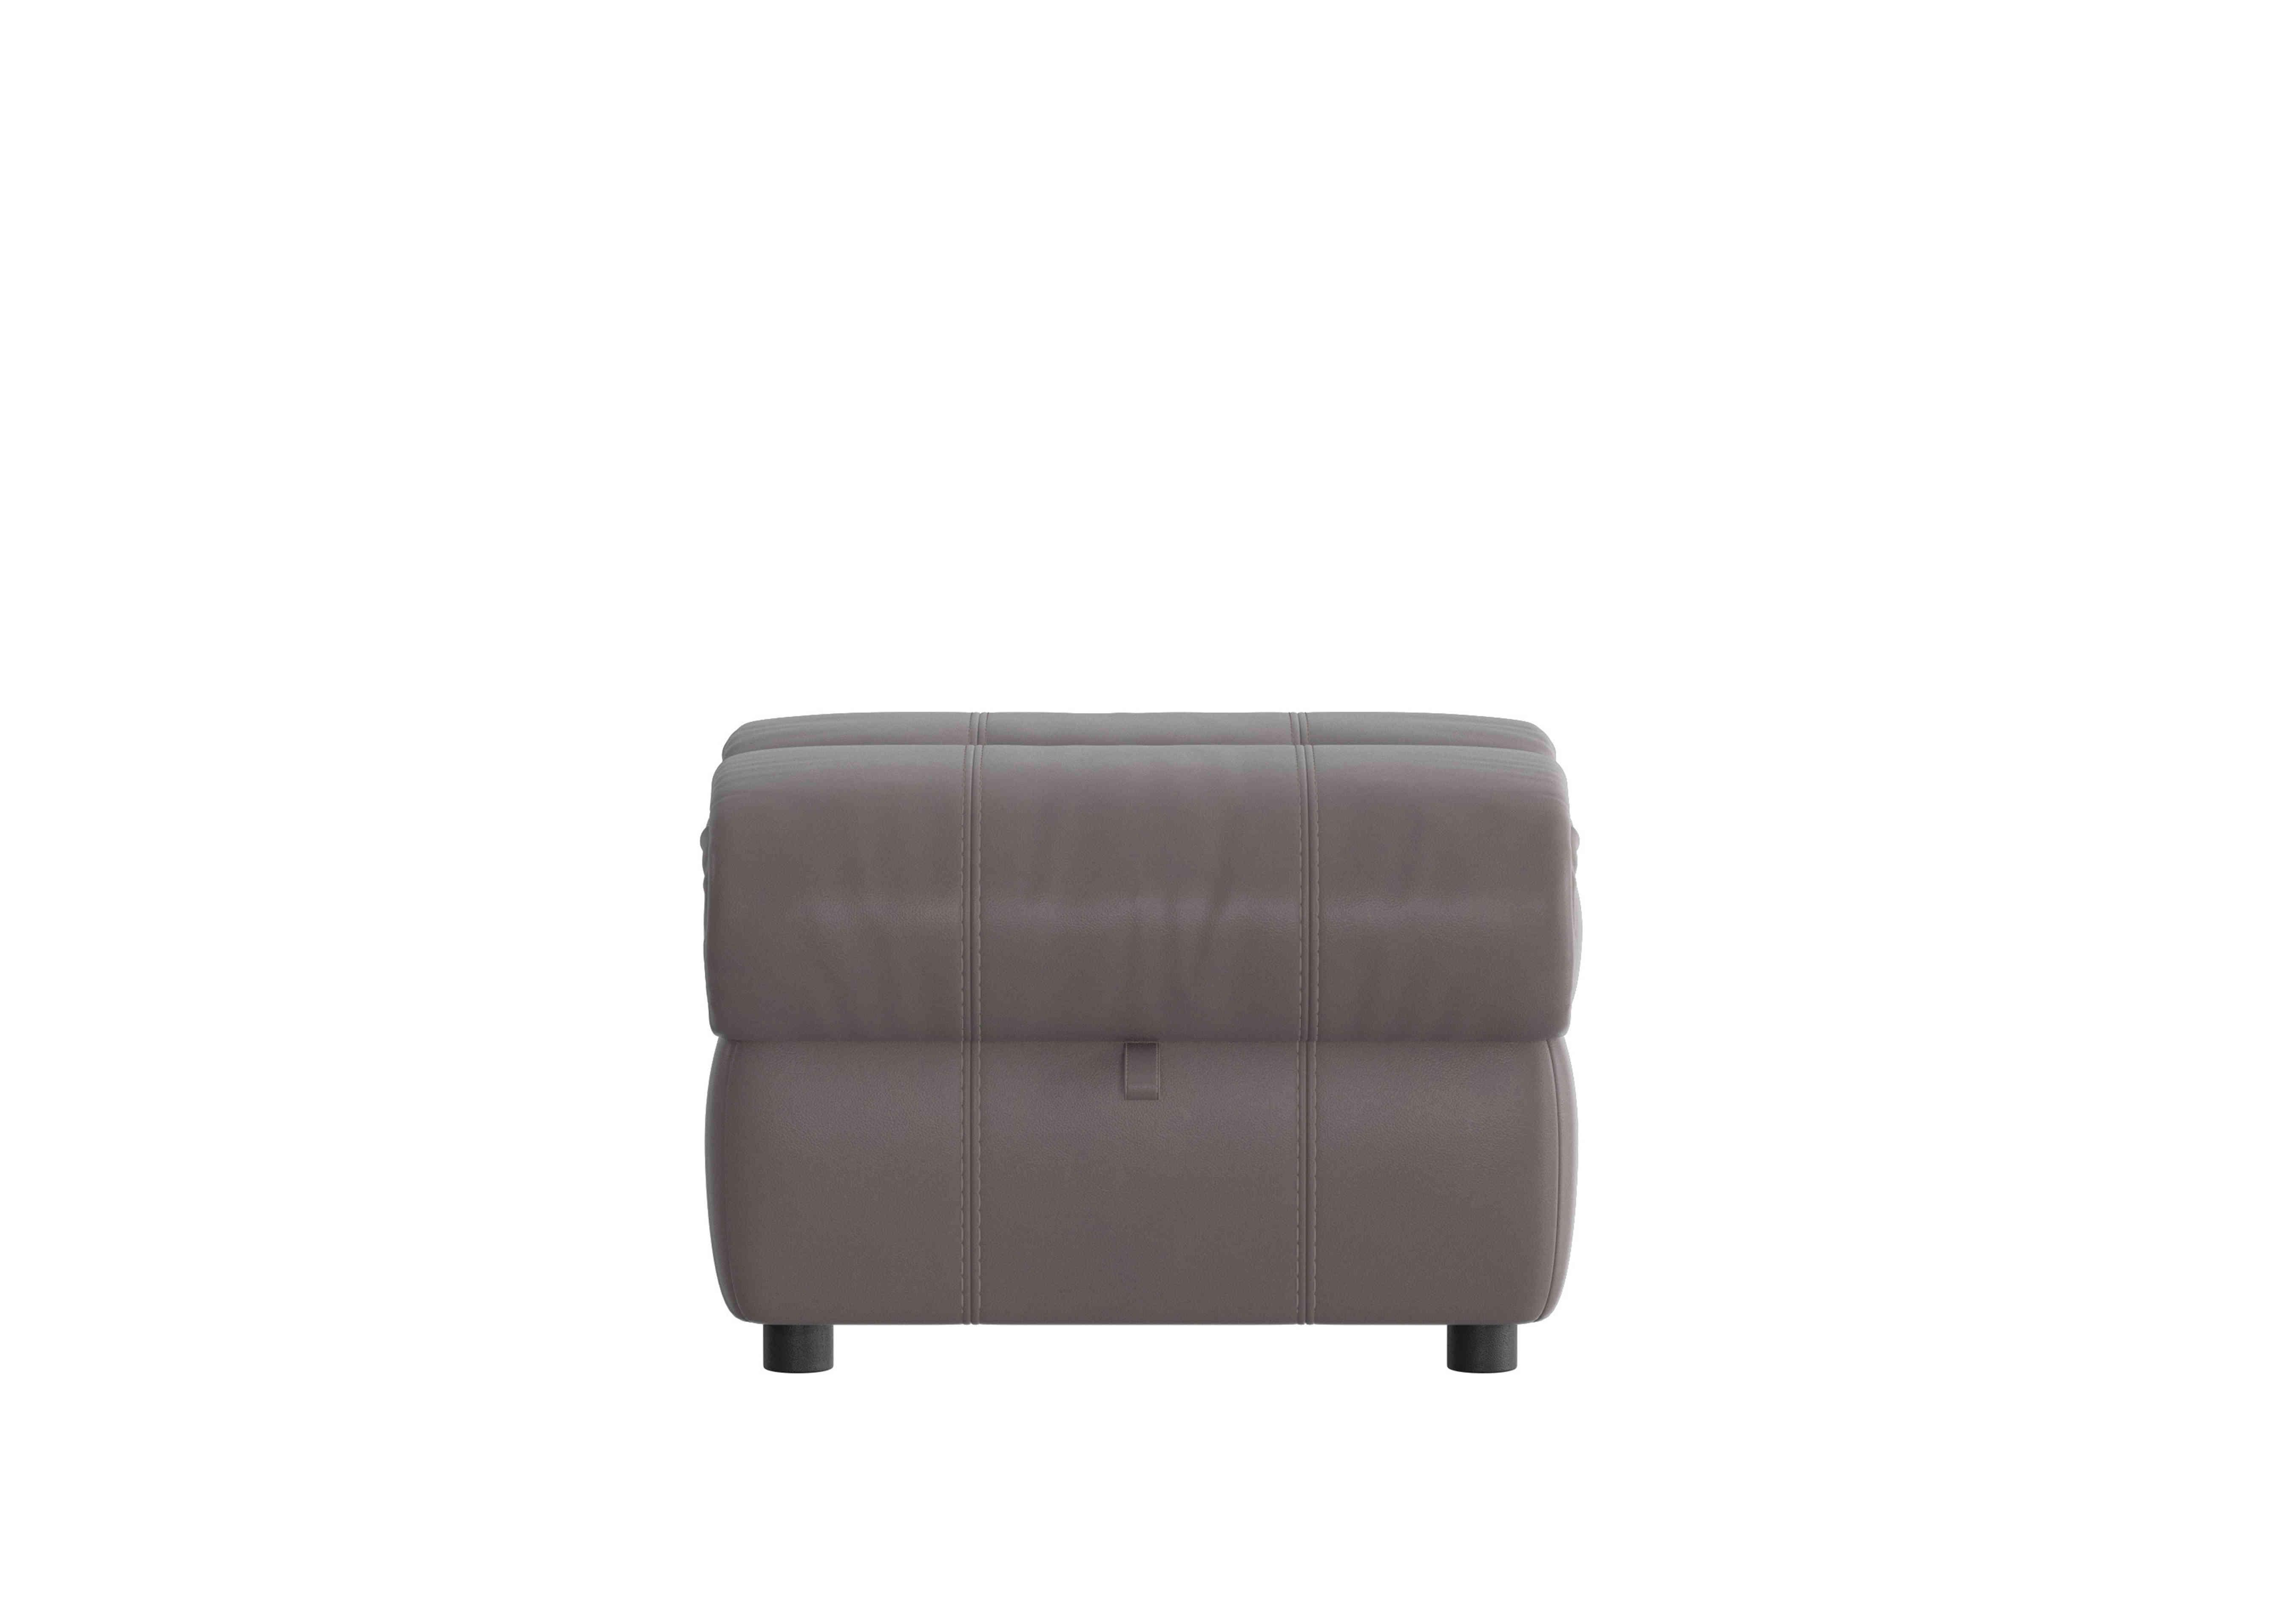 Link Leather Footstool in Bv-042e Elephant on Furniture Village